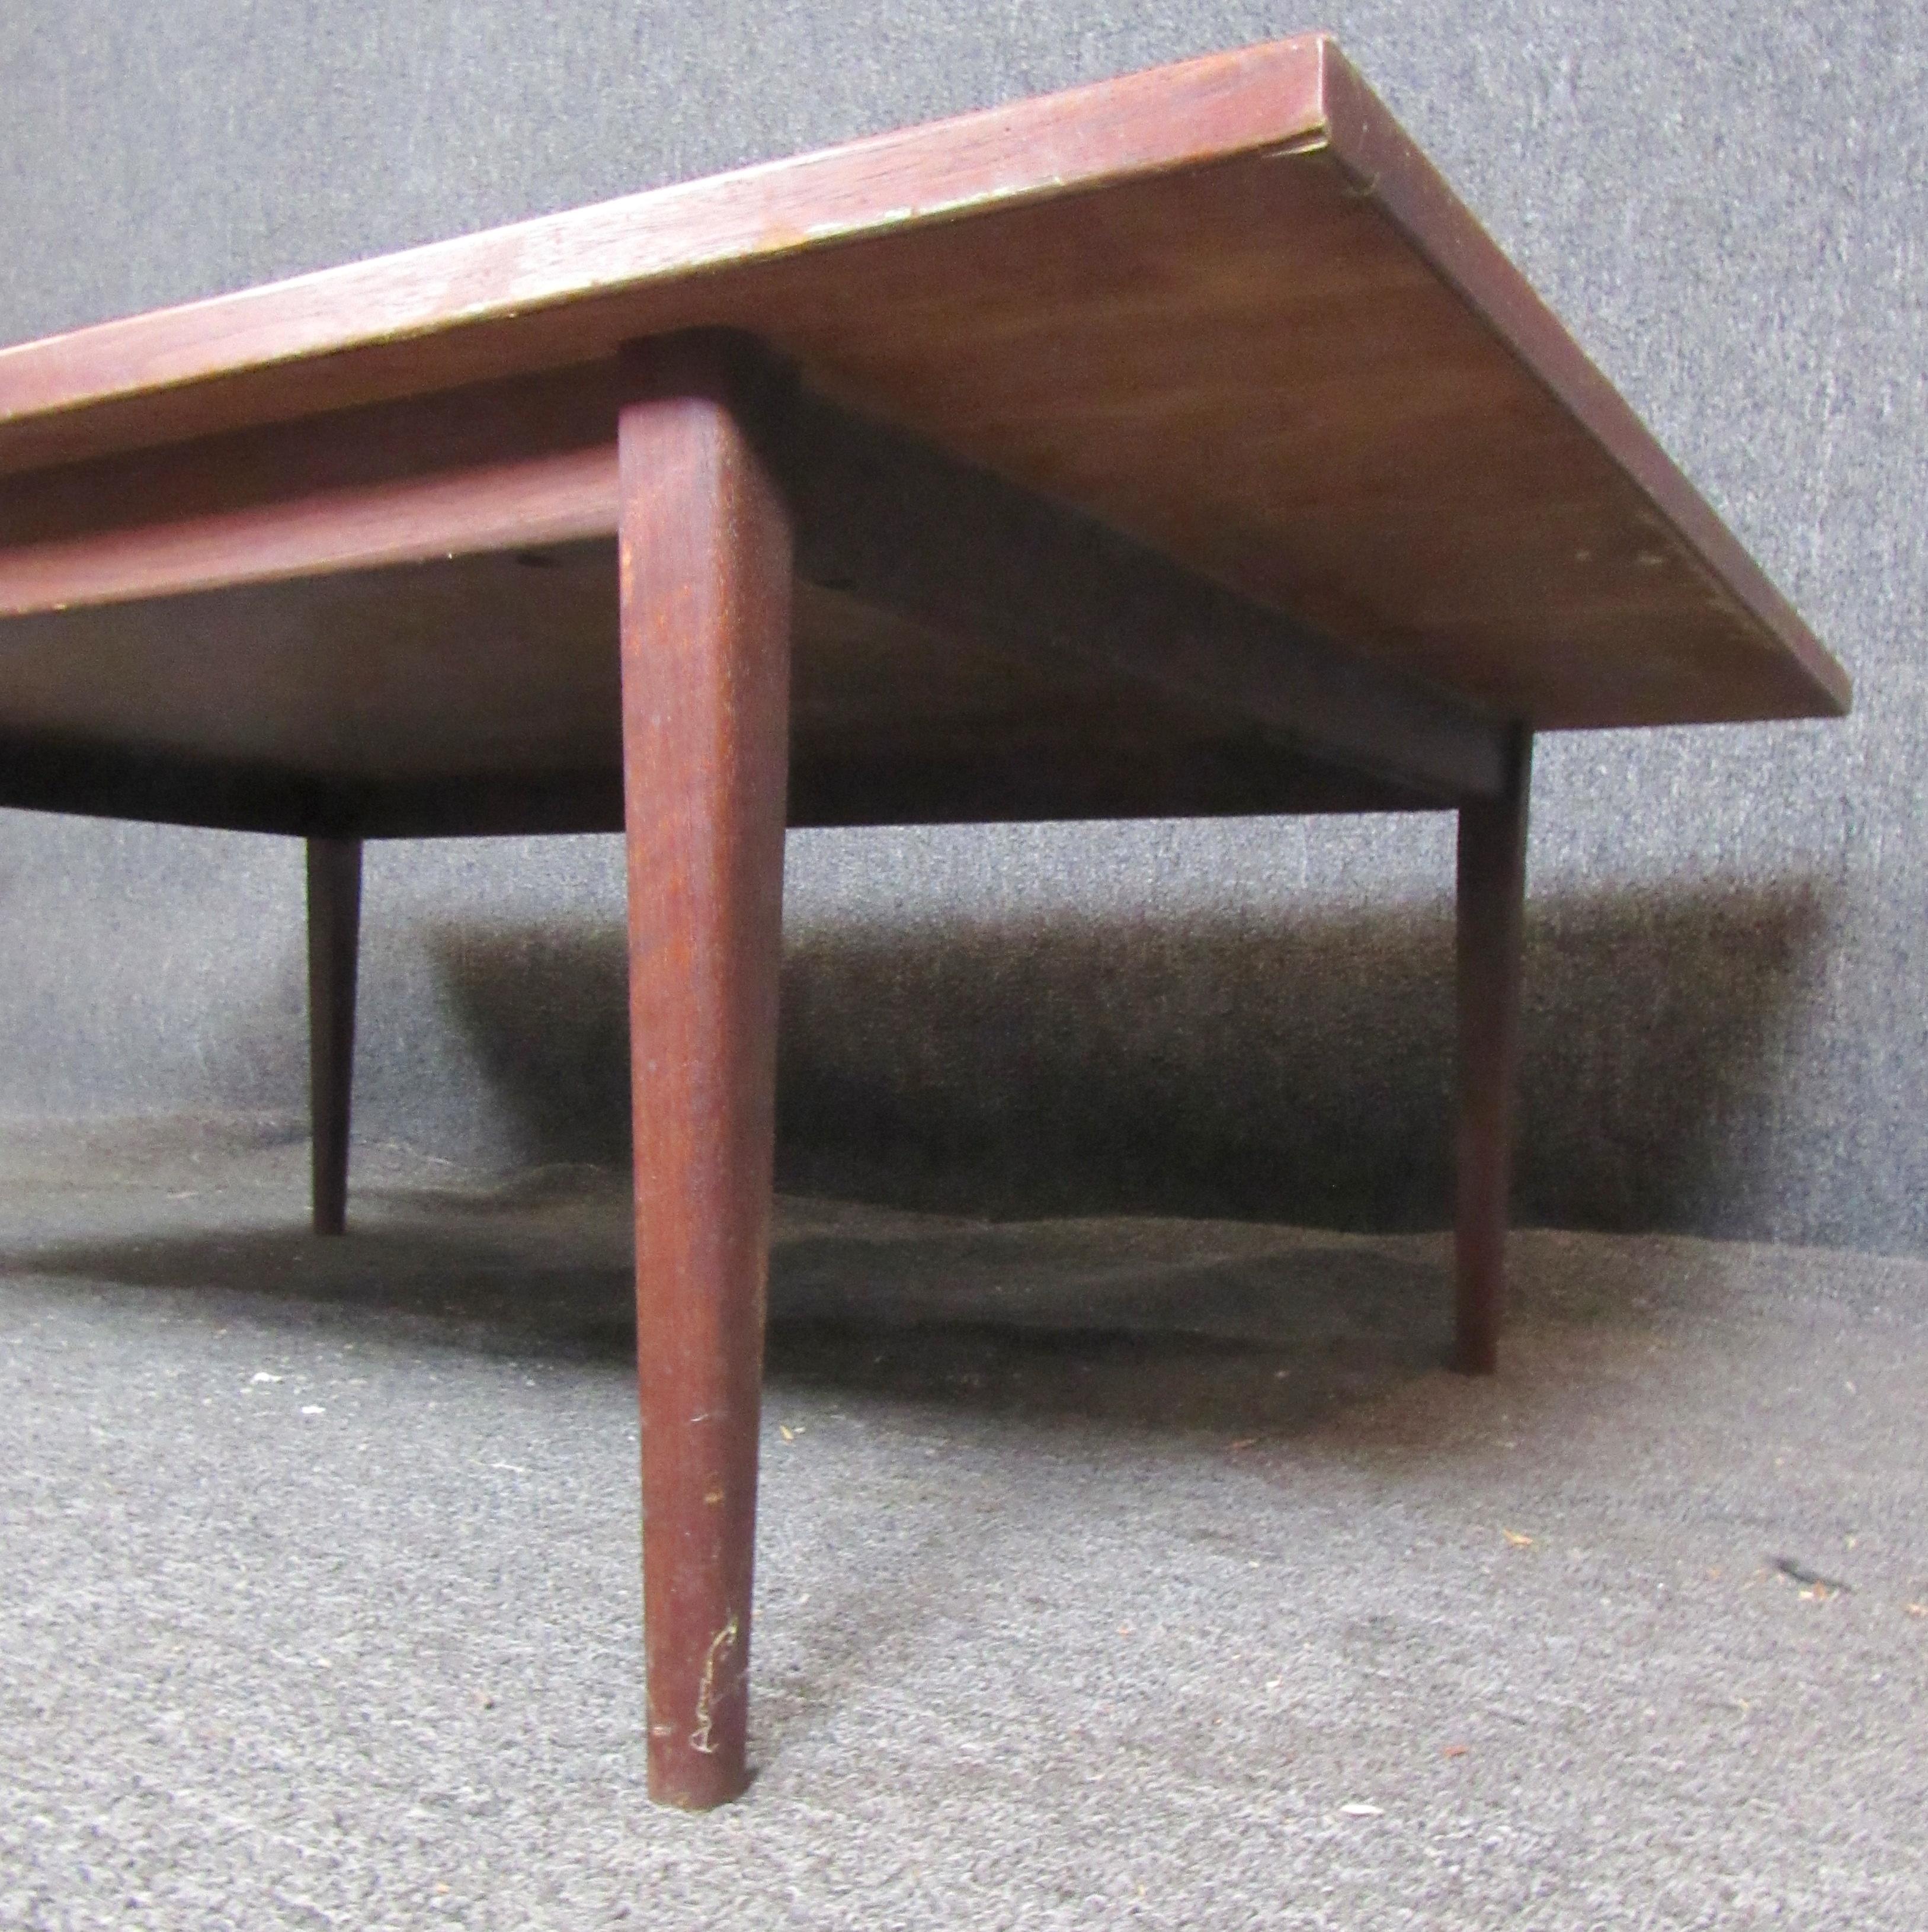 Simple and handsome teak wood coffee table. Made in Denmark in the 1960s with warm teak.
Please confirm location.